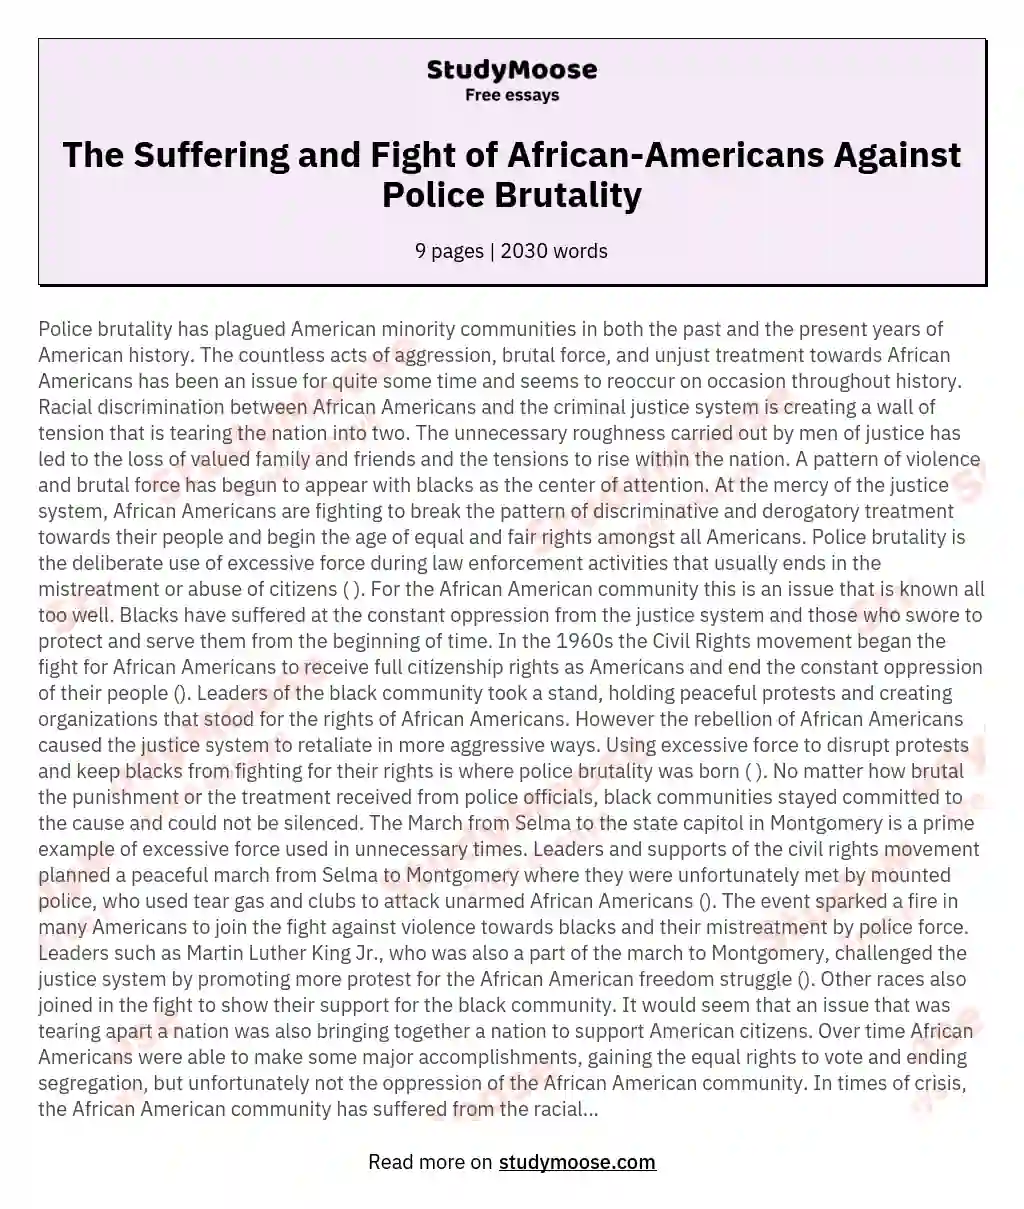 The Suffering and Fight of African-Americans Against Police Brutality essay